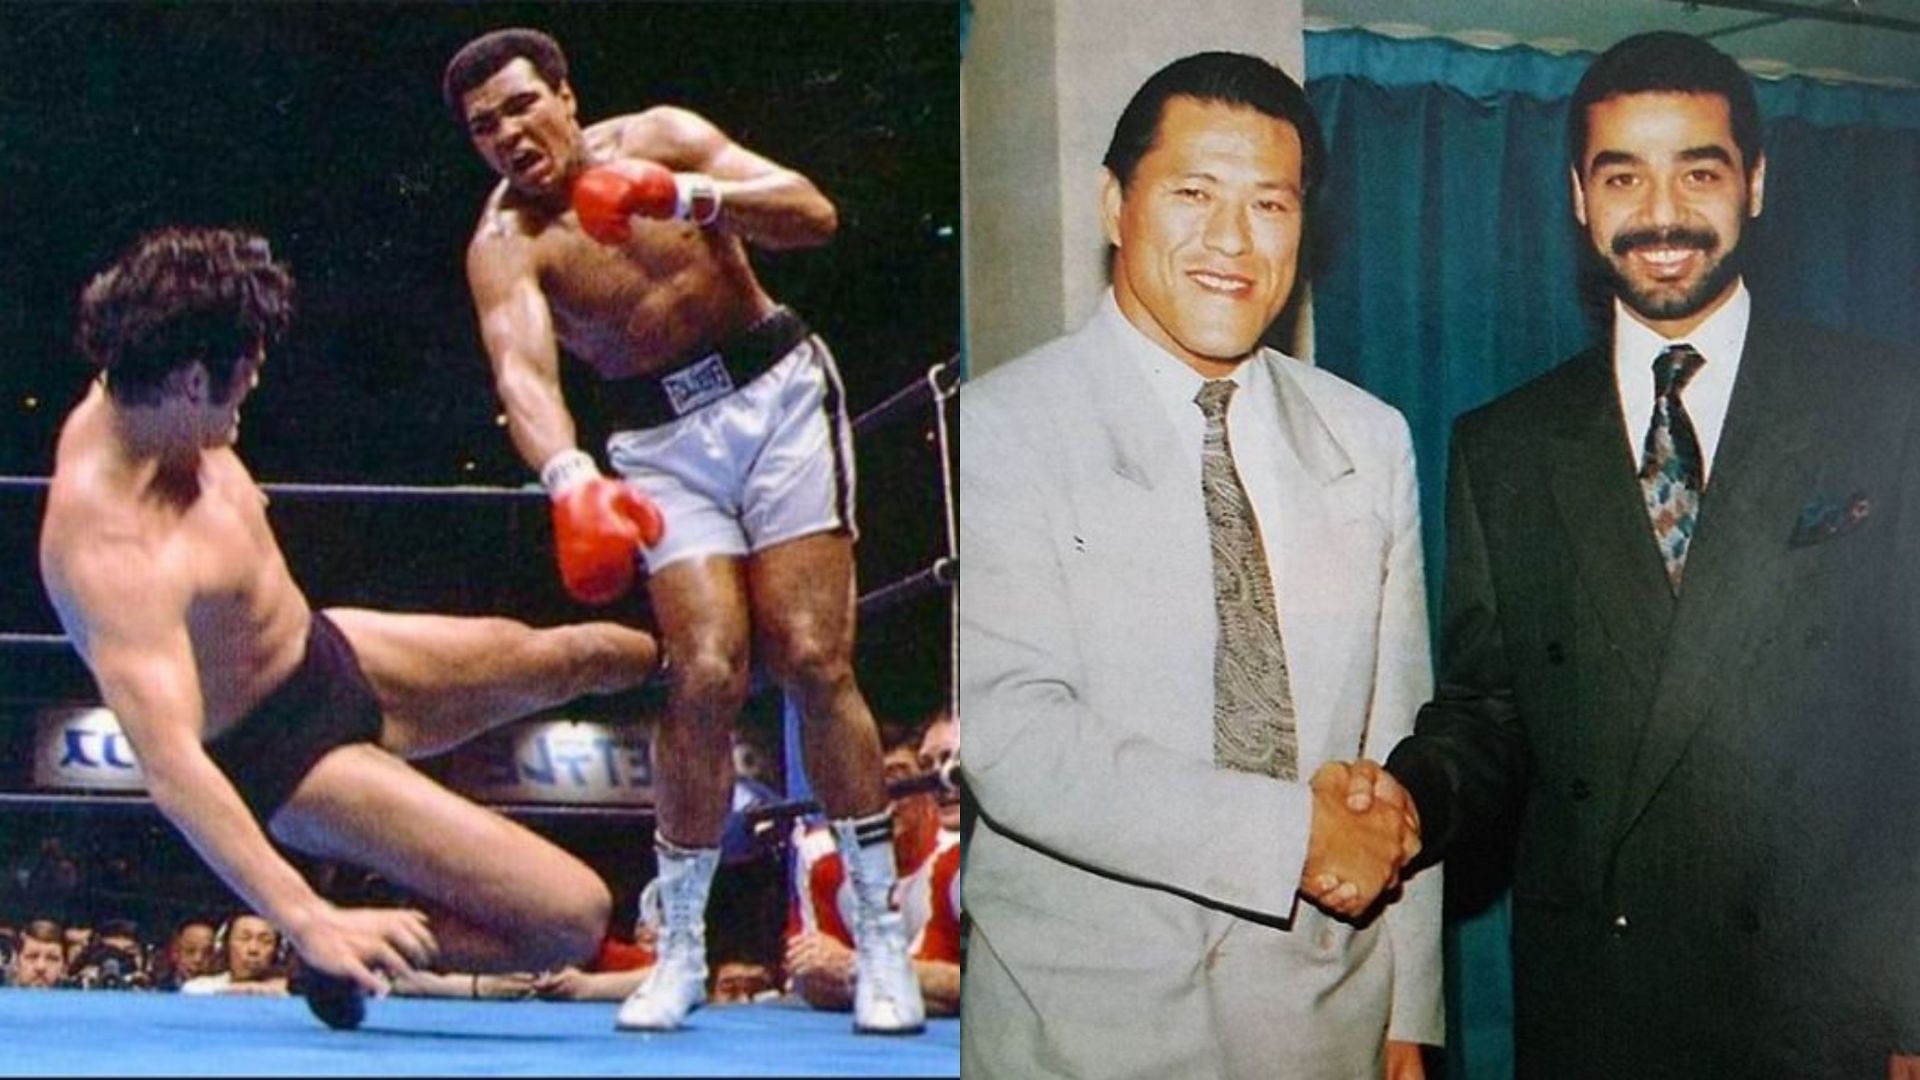 5 things you should know about late WWE Hall of Famer Antonio Inoki